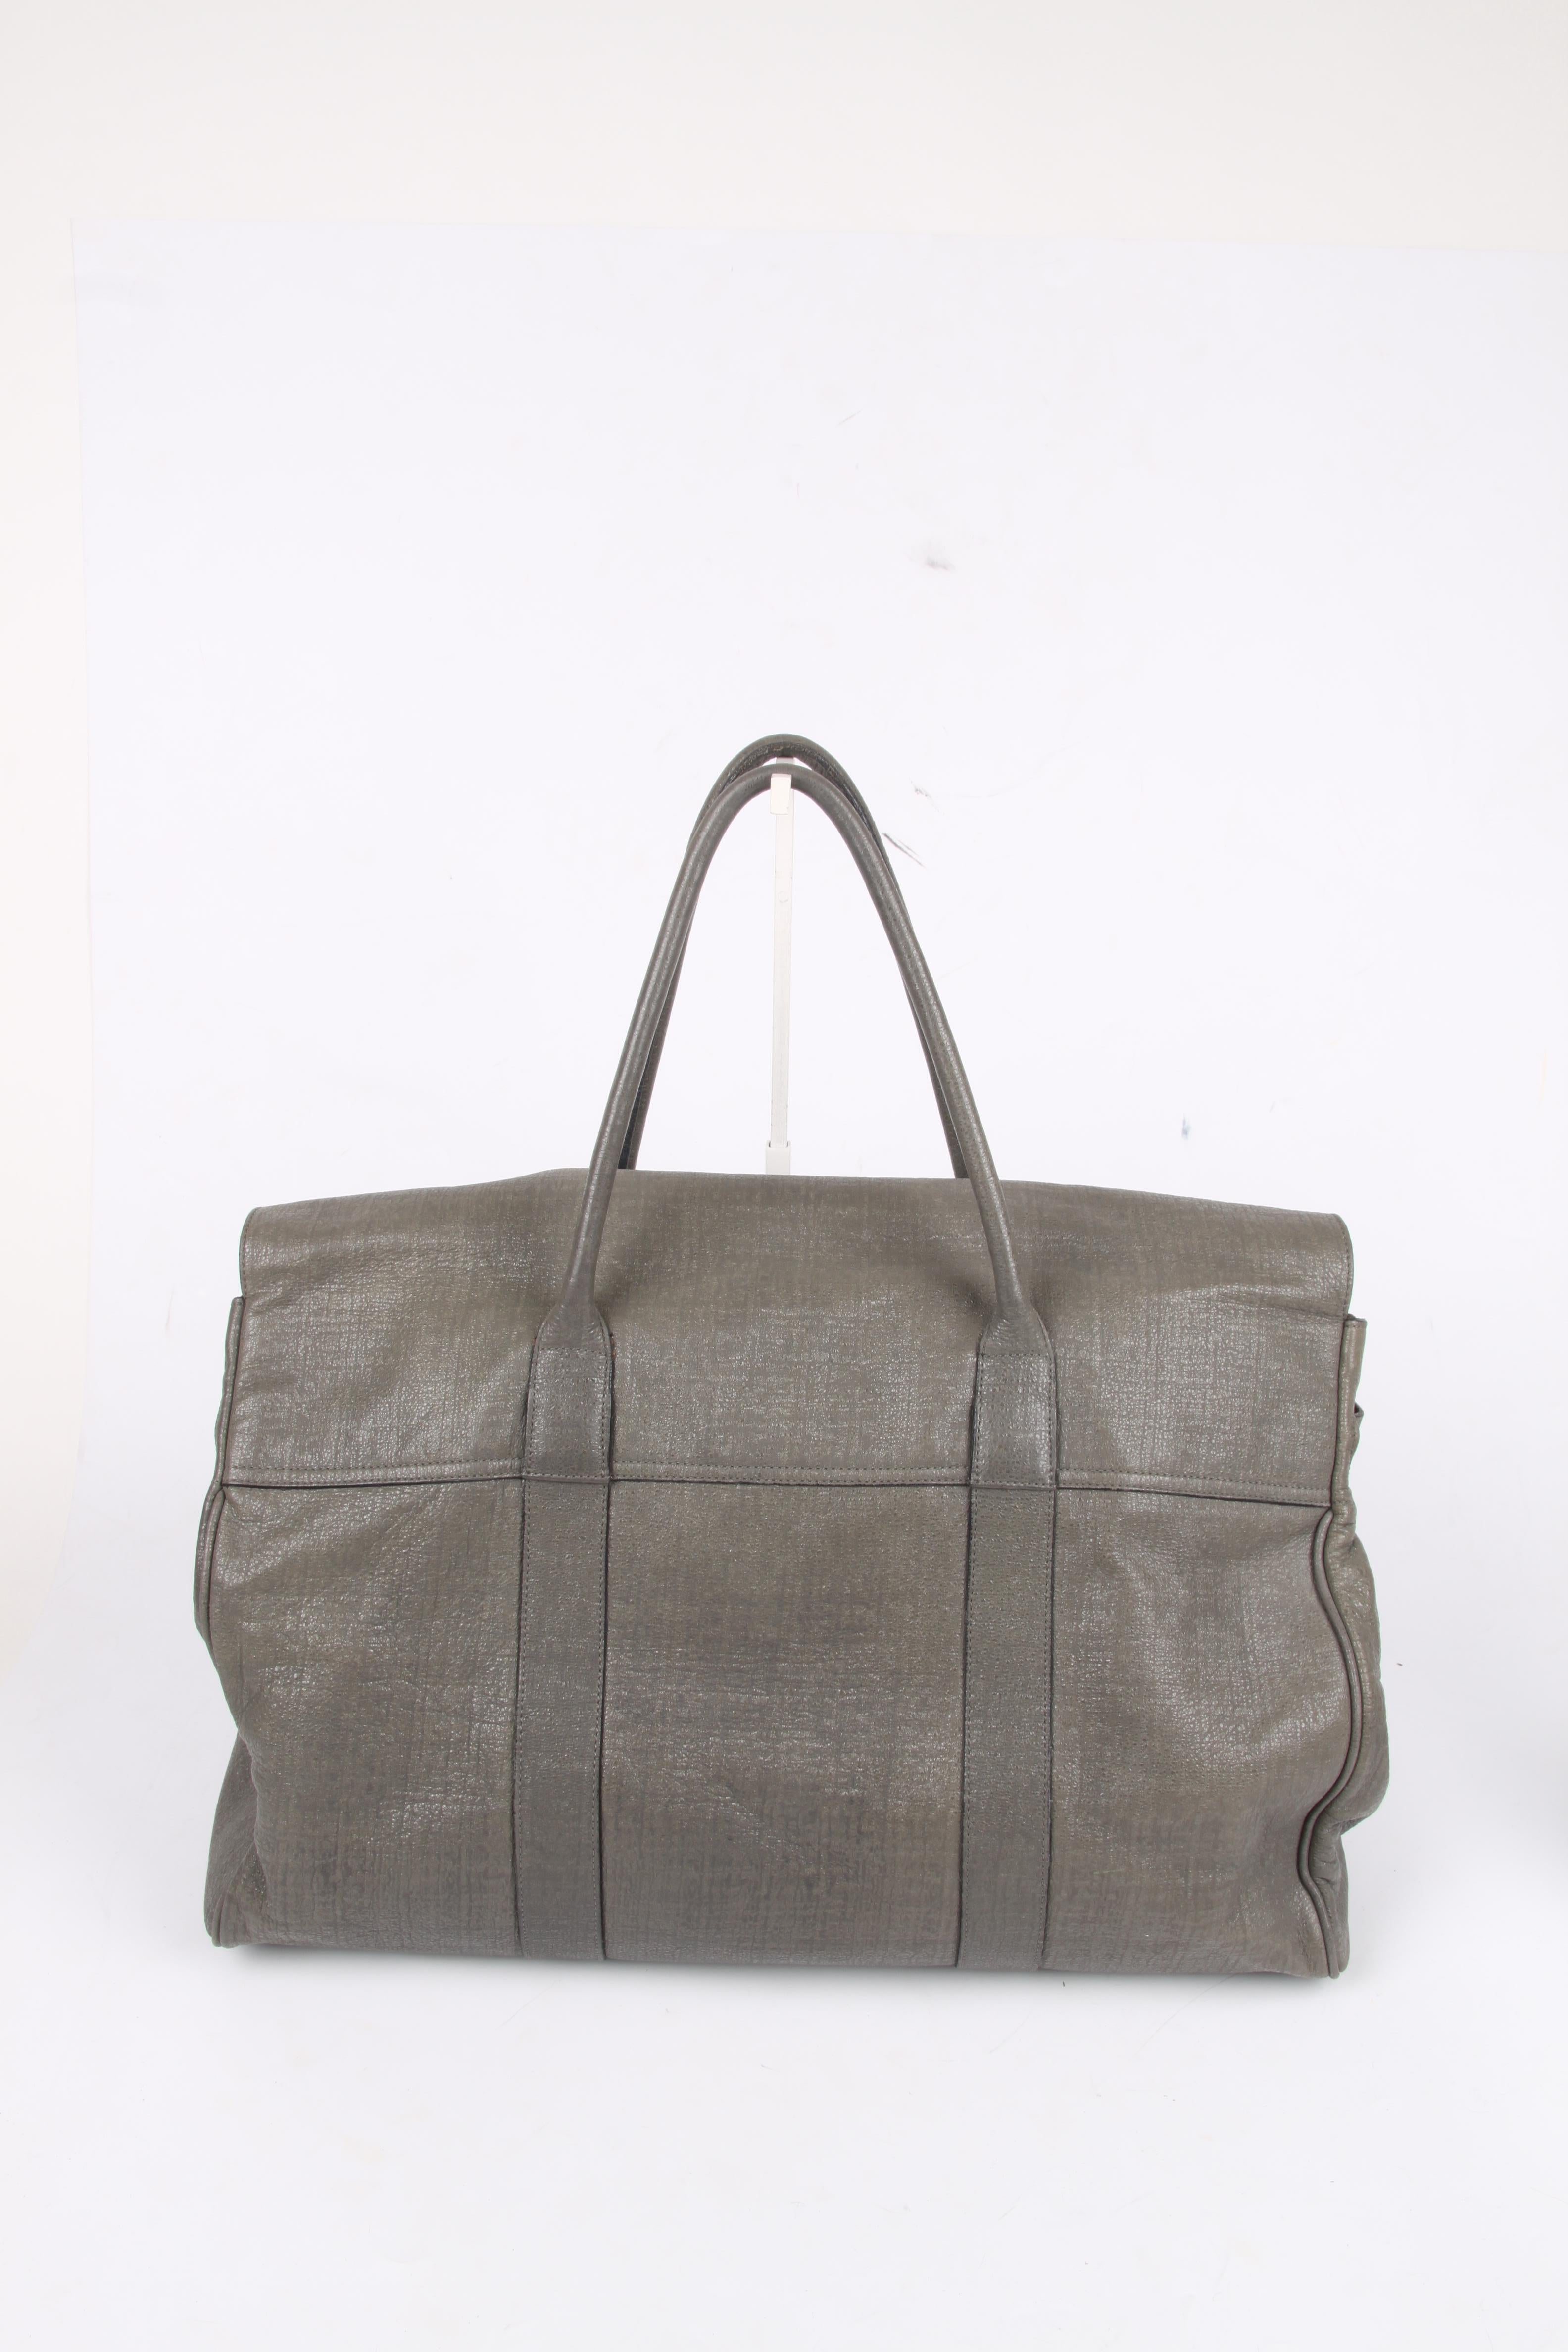 Mulberry Bayswater Sparkle Tweed Leather - mole grey In Fair Condition For Sale In Baarn, NL